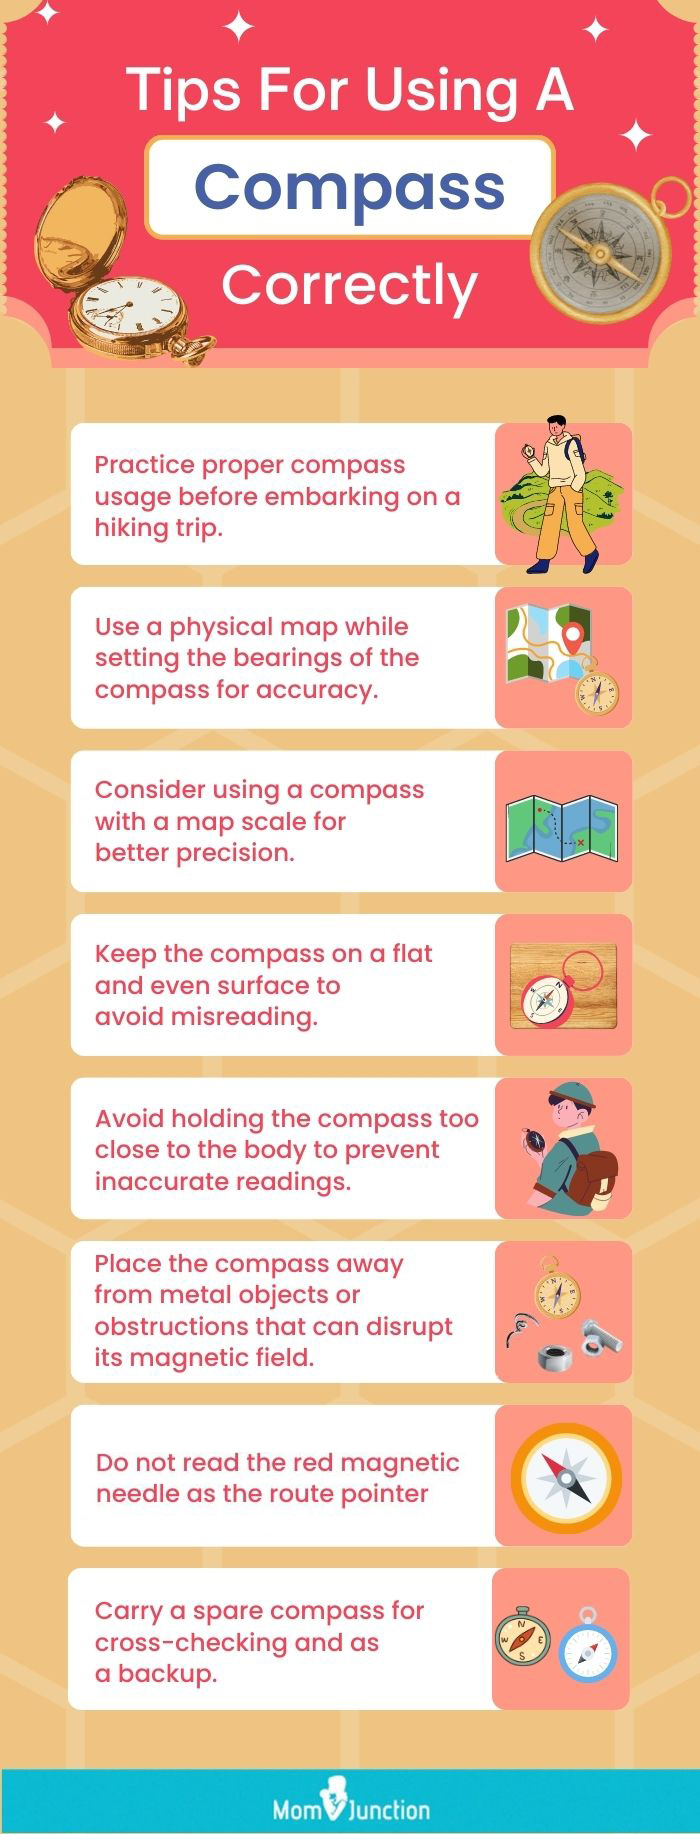 Tips For Using A Compass Correctly (infographic)